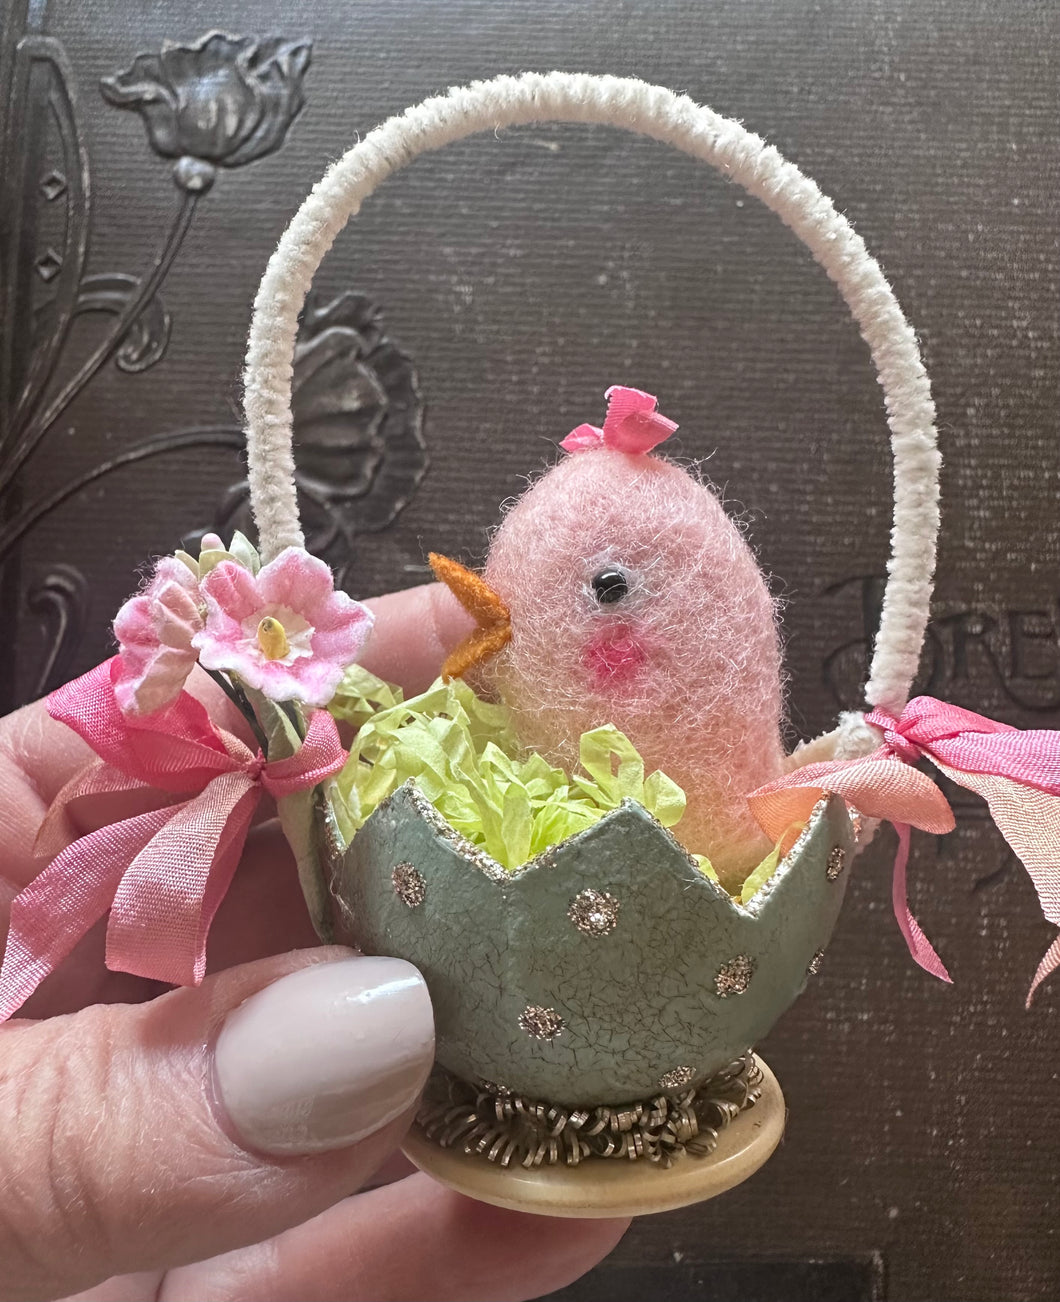 Tiny Needle Felted Pink Chick in a Spring Egg Basket